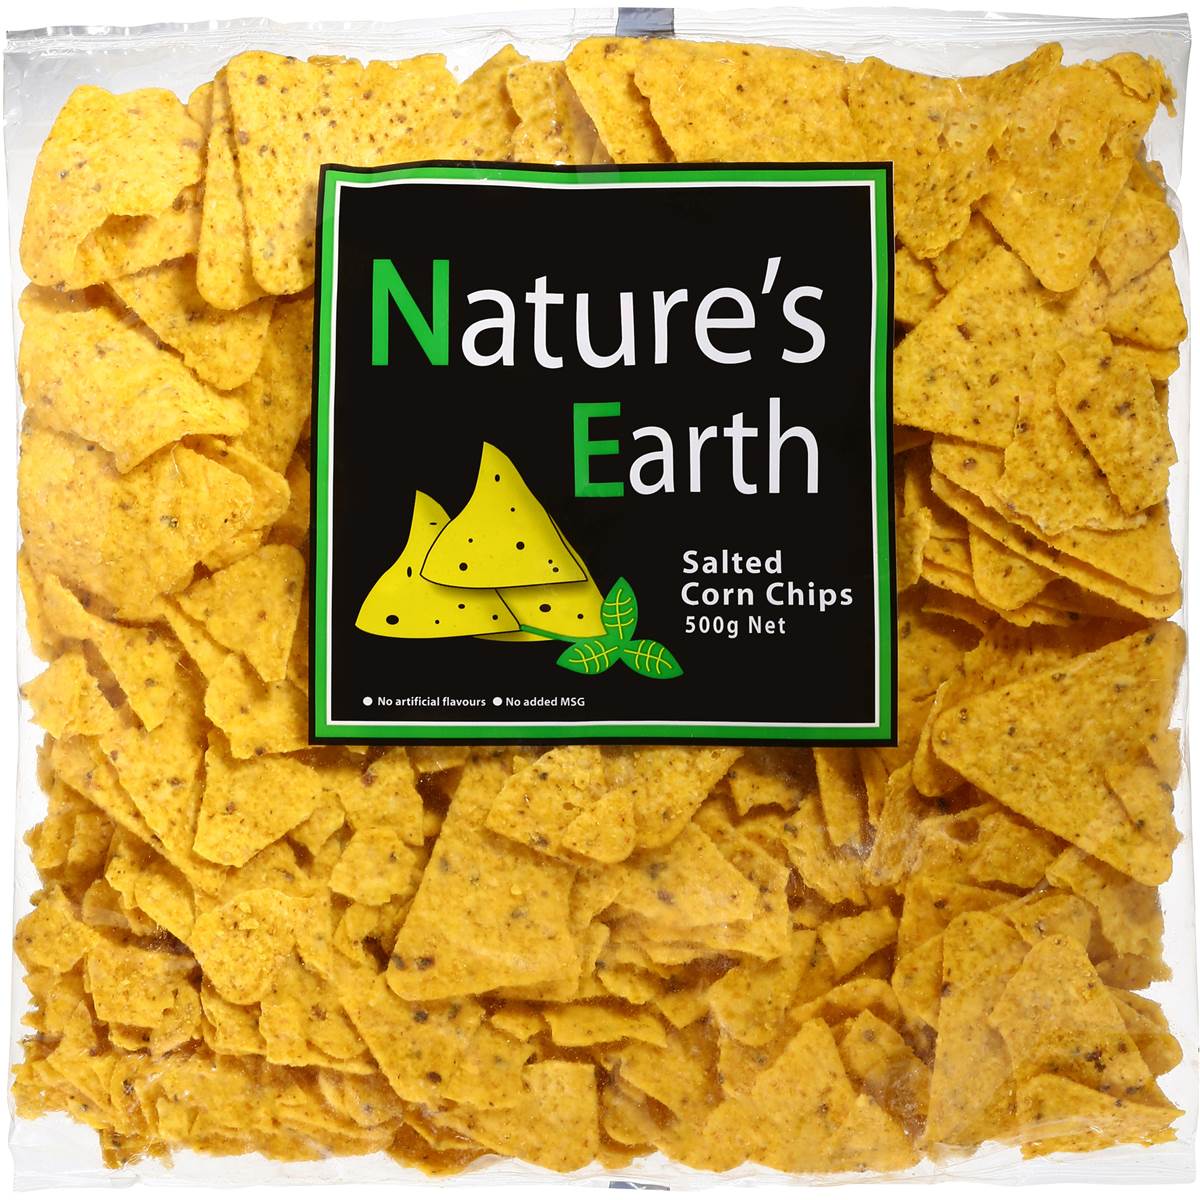 Calories in Nature's Earth Corn Chips Salted